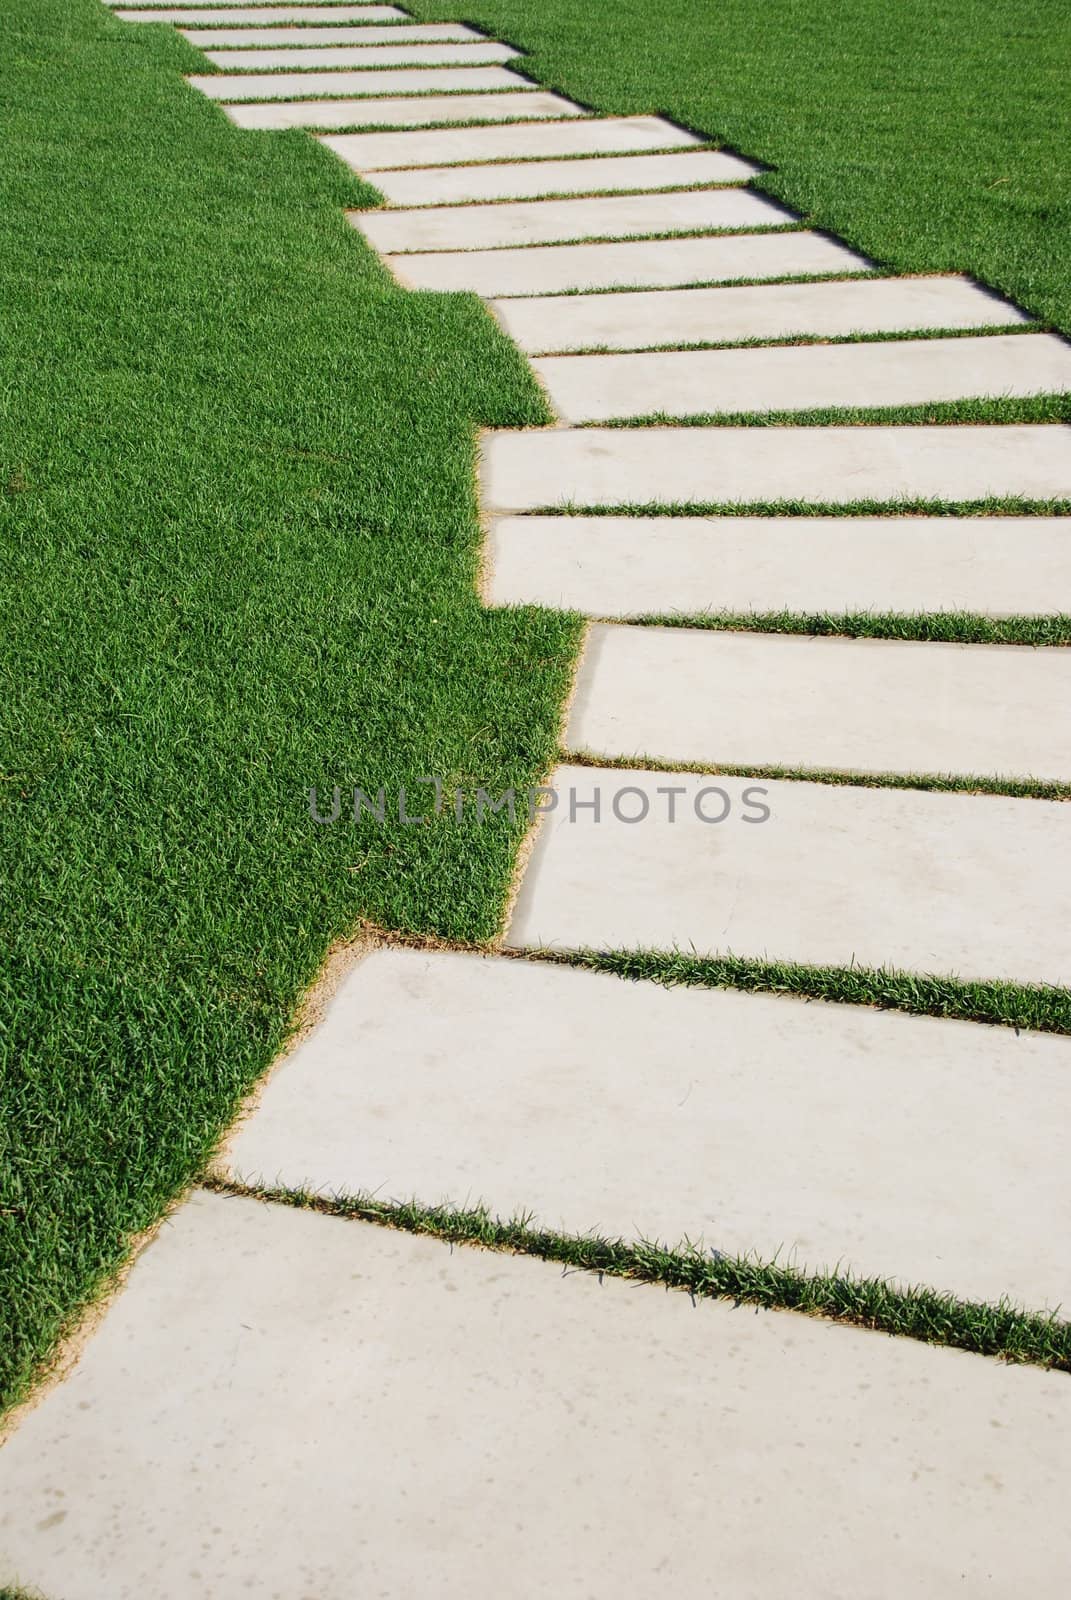 Serpentine pathway stones on a park lawn (concept) by luissantos84